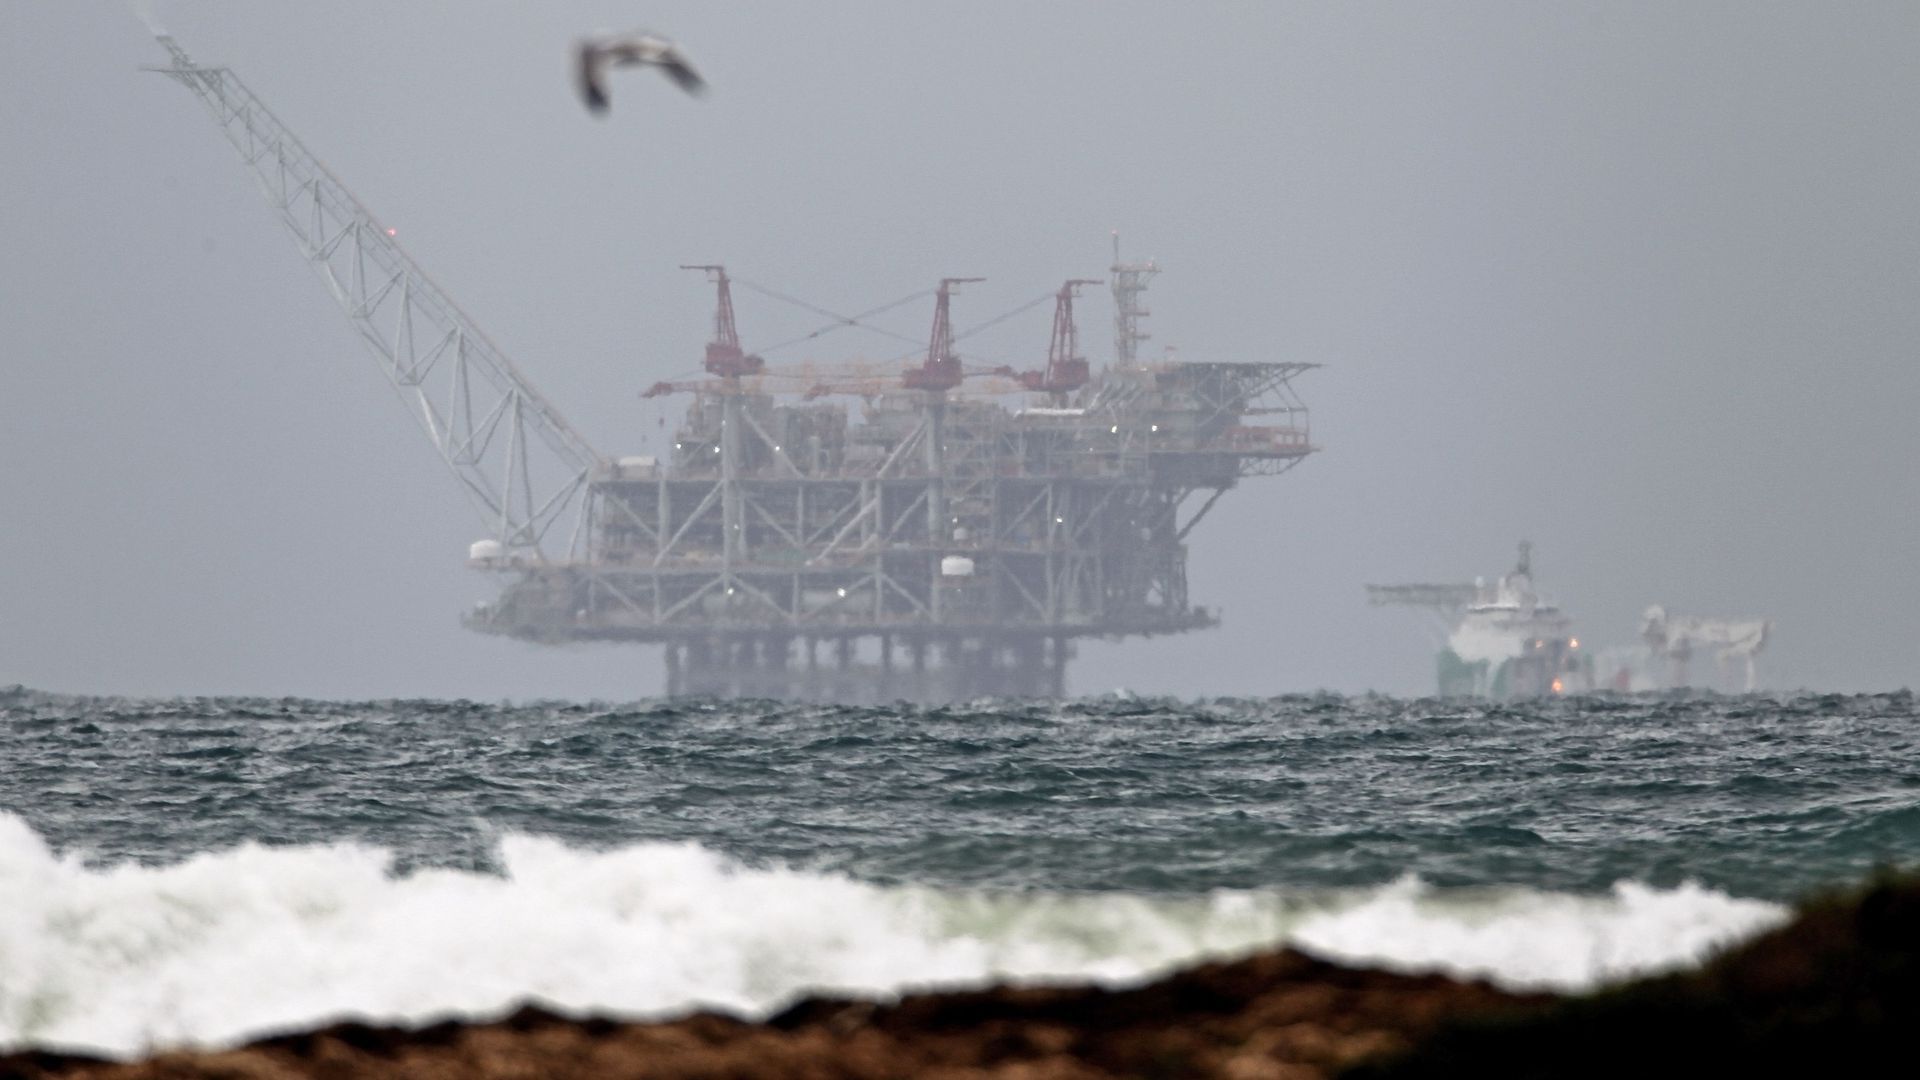 The platform of the Leviathan natural gas field in the Mediterranean Sea. Photo: Jack Guez/AFP via Getty Images